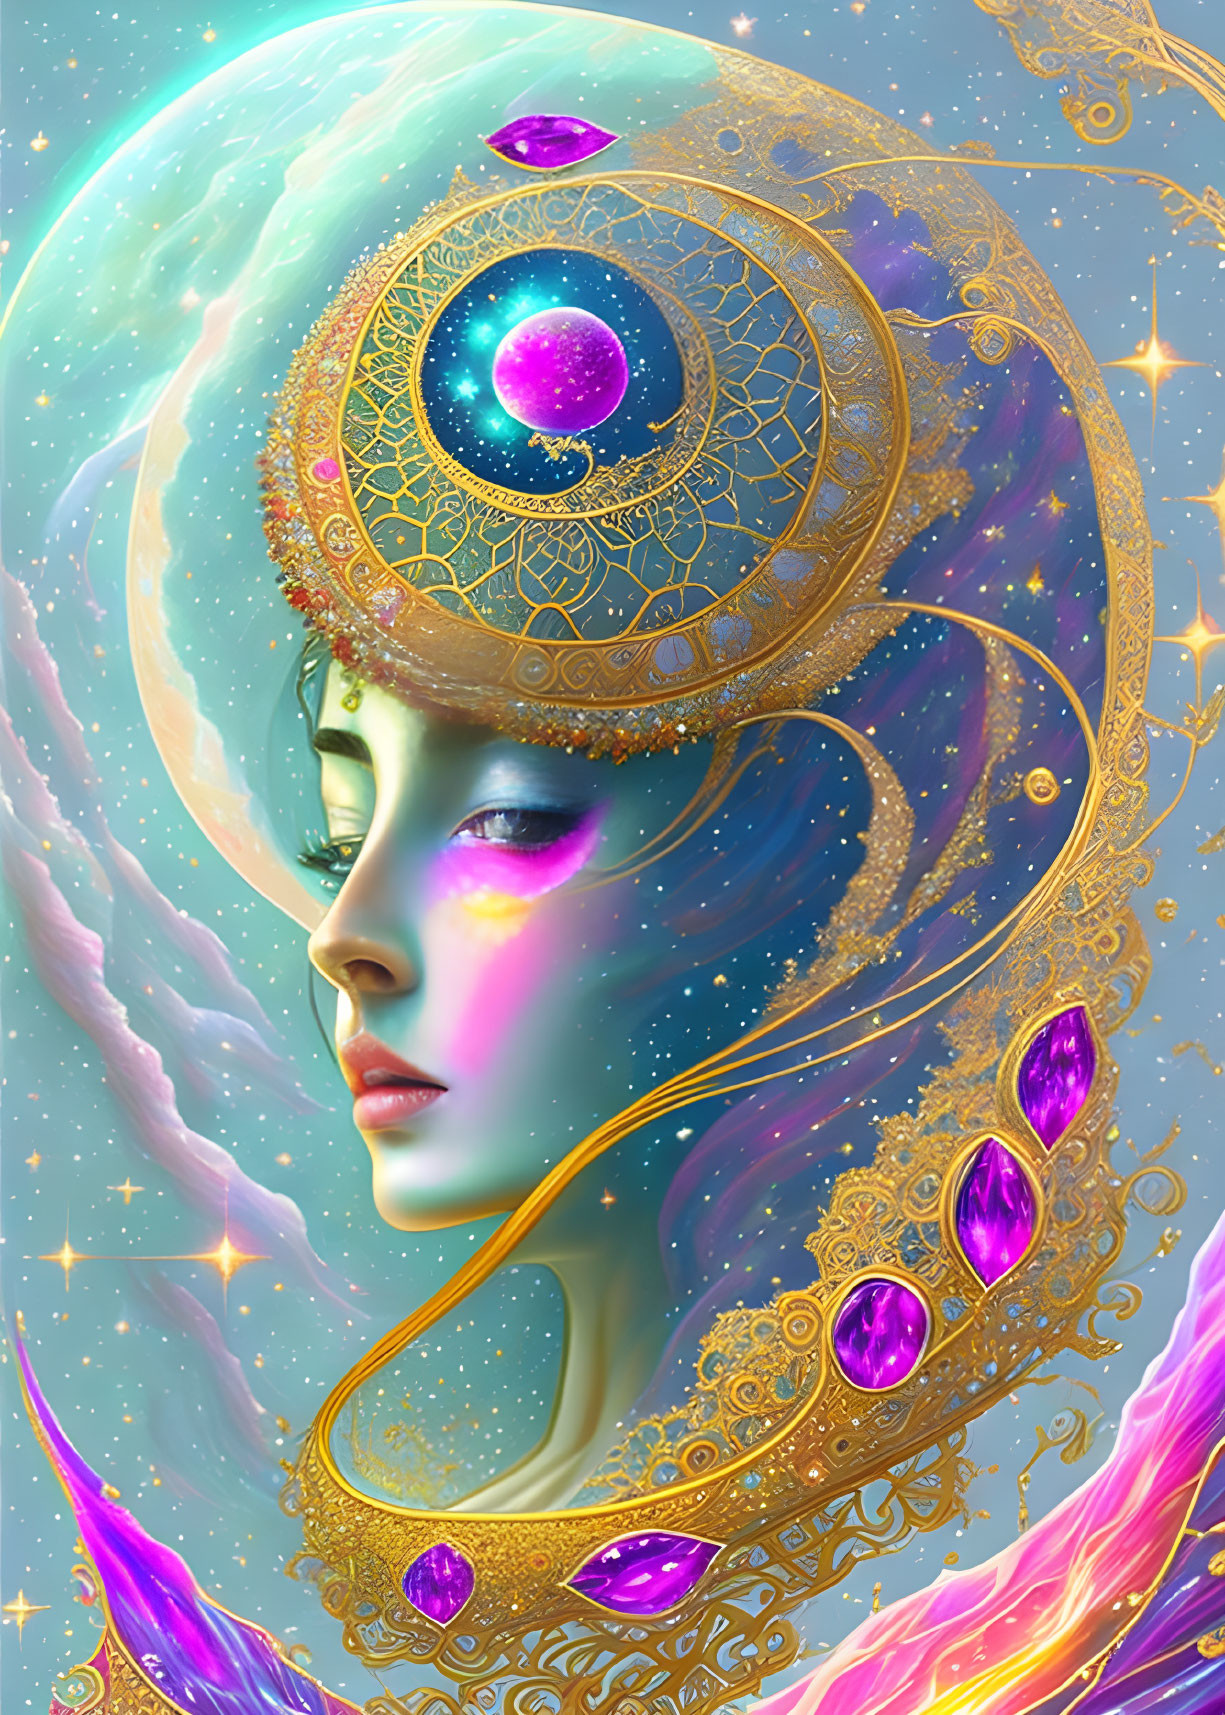 Illustration of ethereal woman with golden headdress in cosmic setting